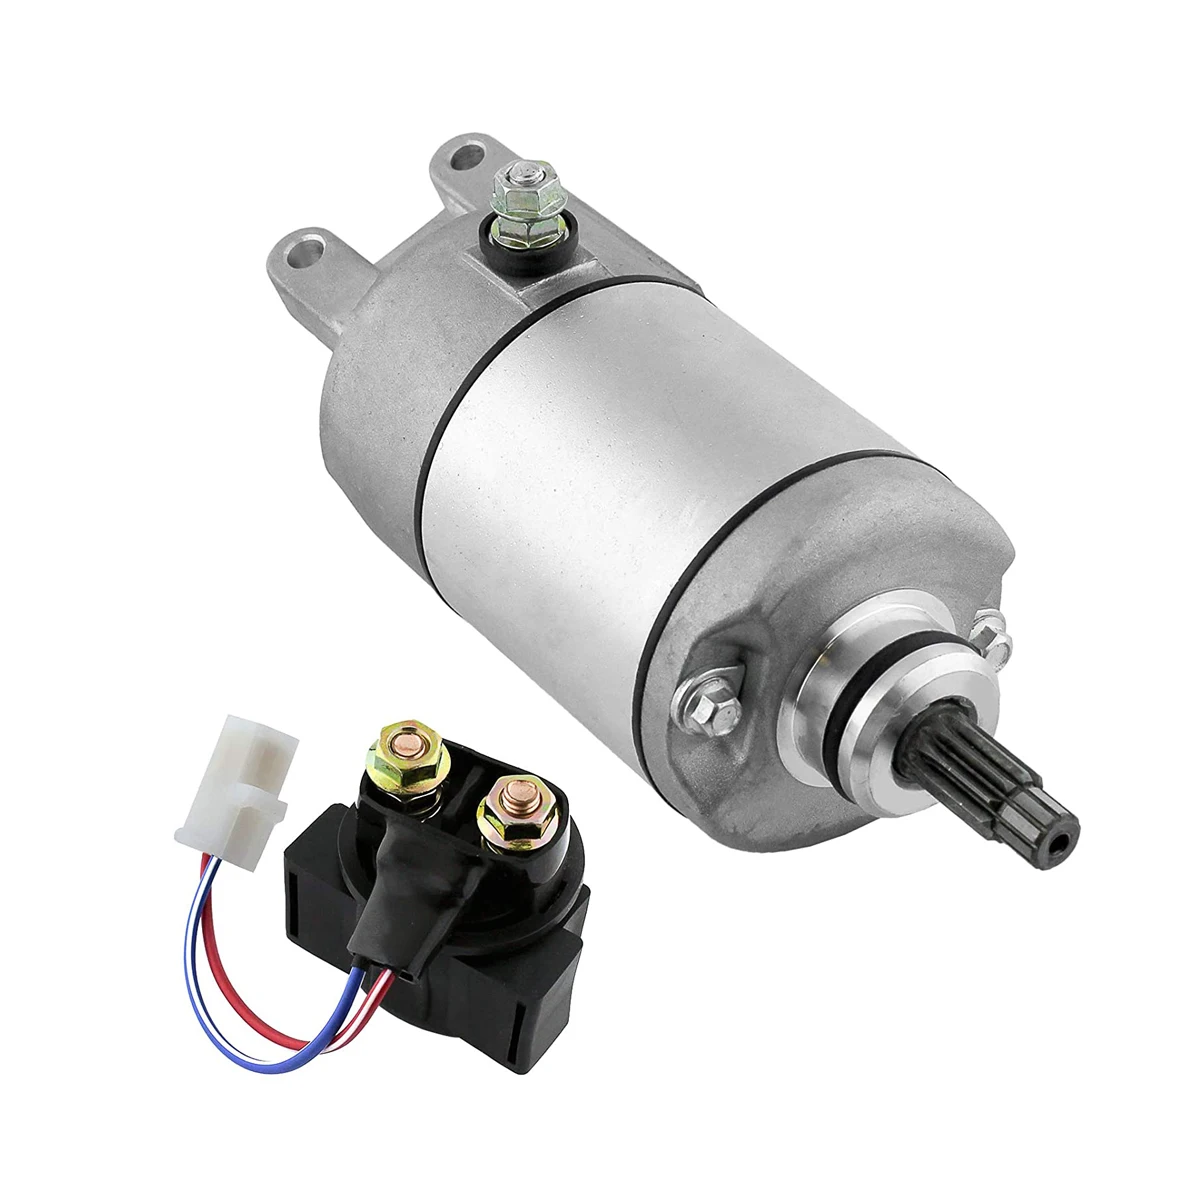 Starter and Relay Solenoid Compatible with Honda Fourtrax 300 Trx300 Trx300Fw 2X4 4X4 1988-2000